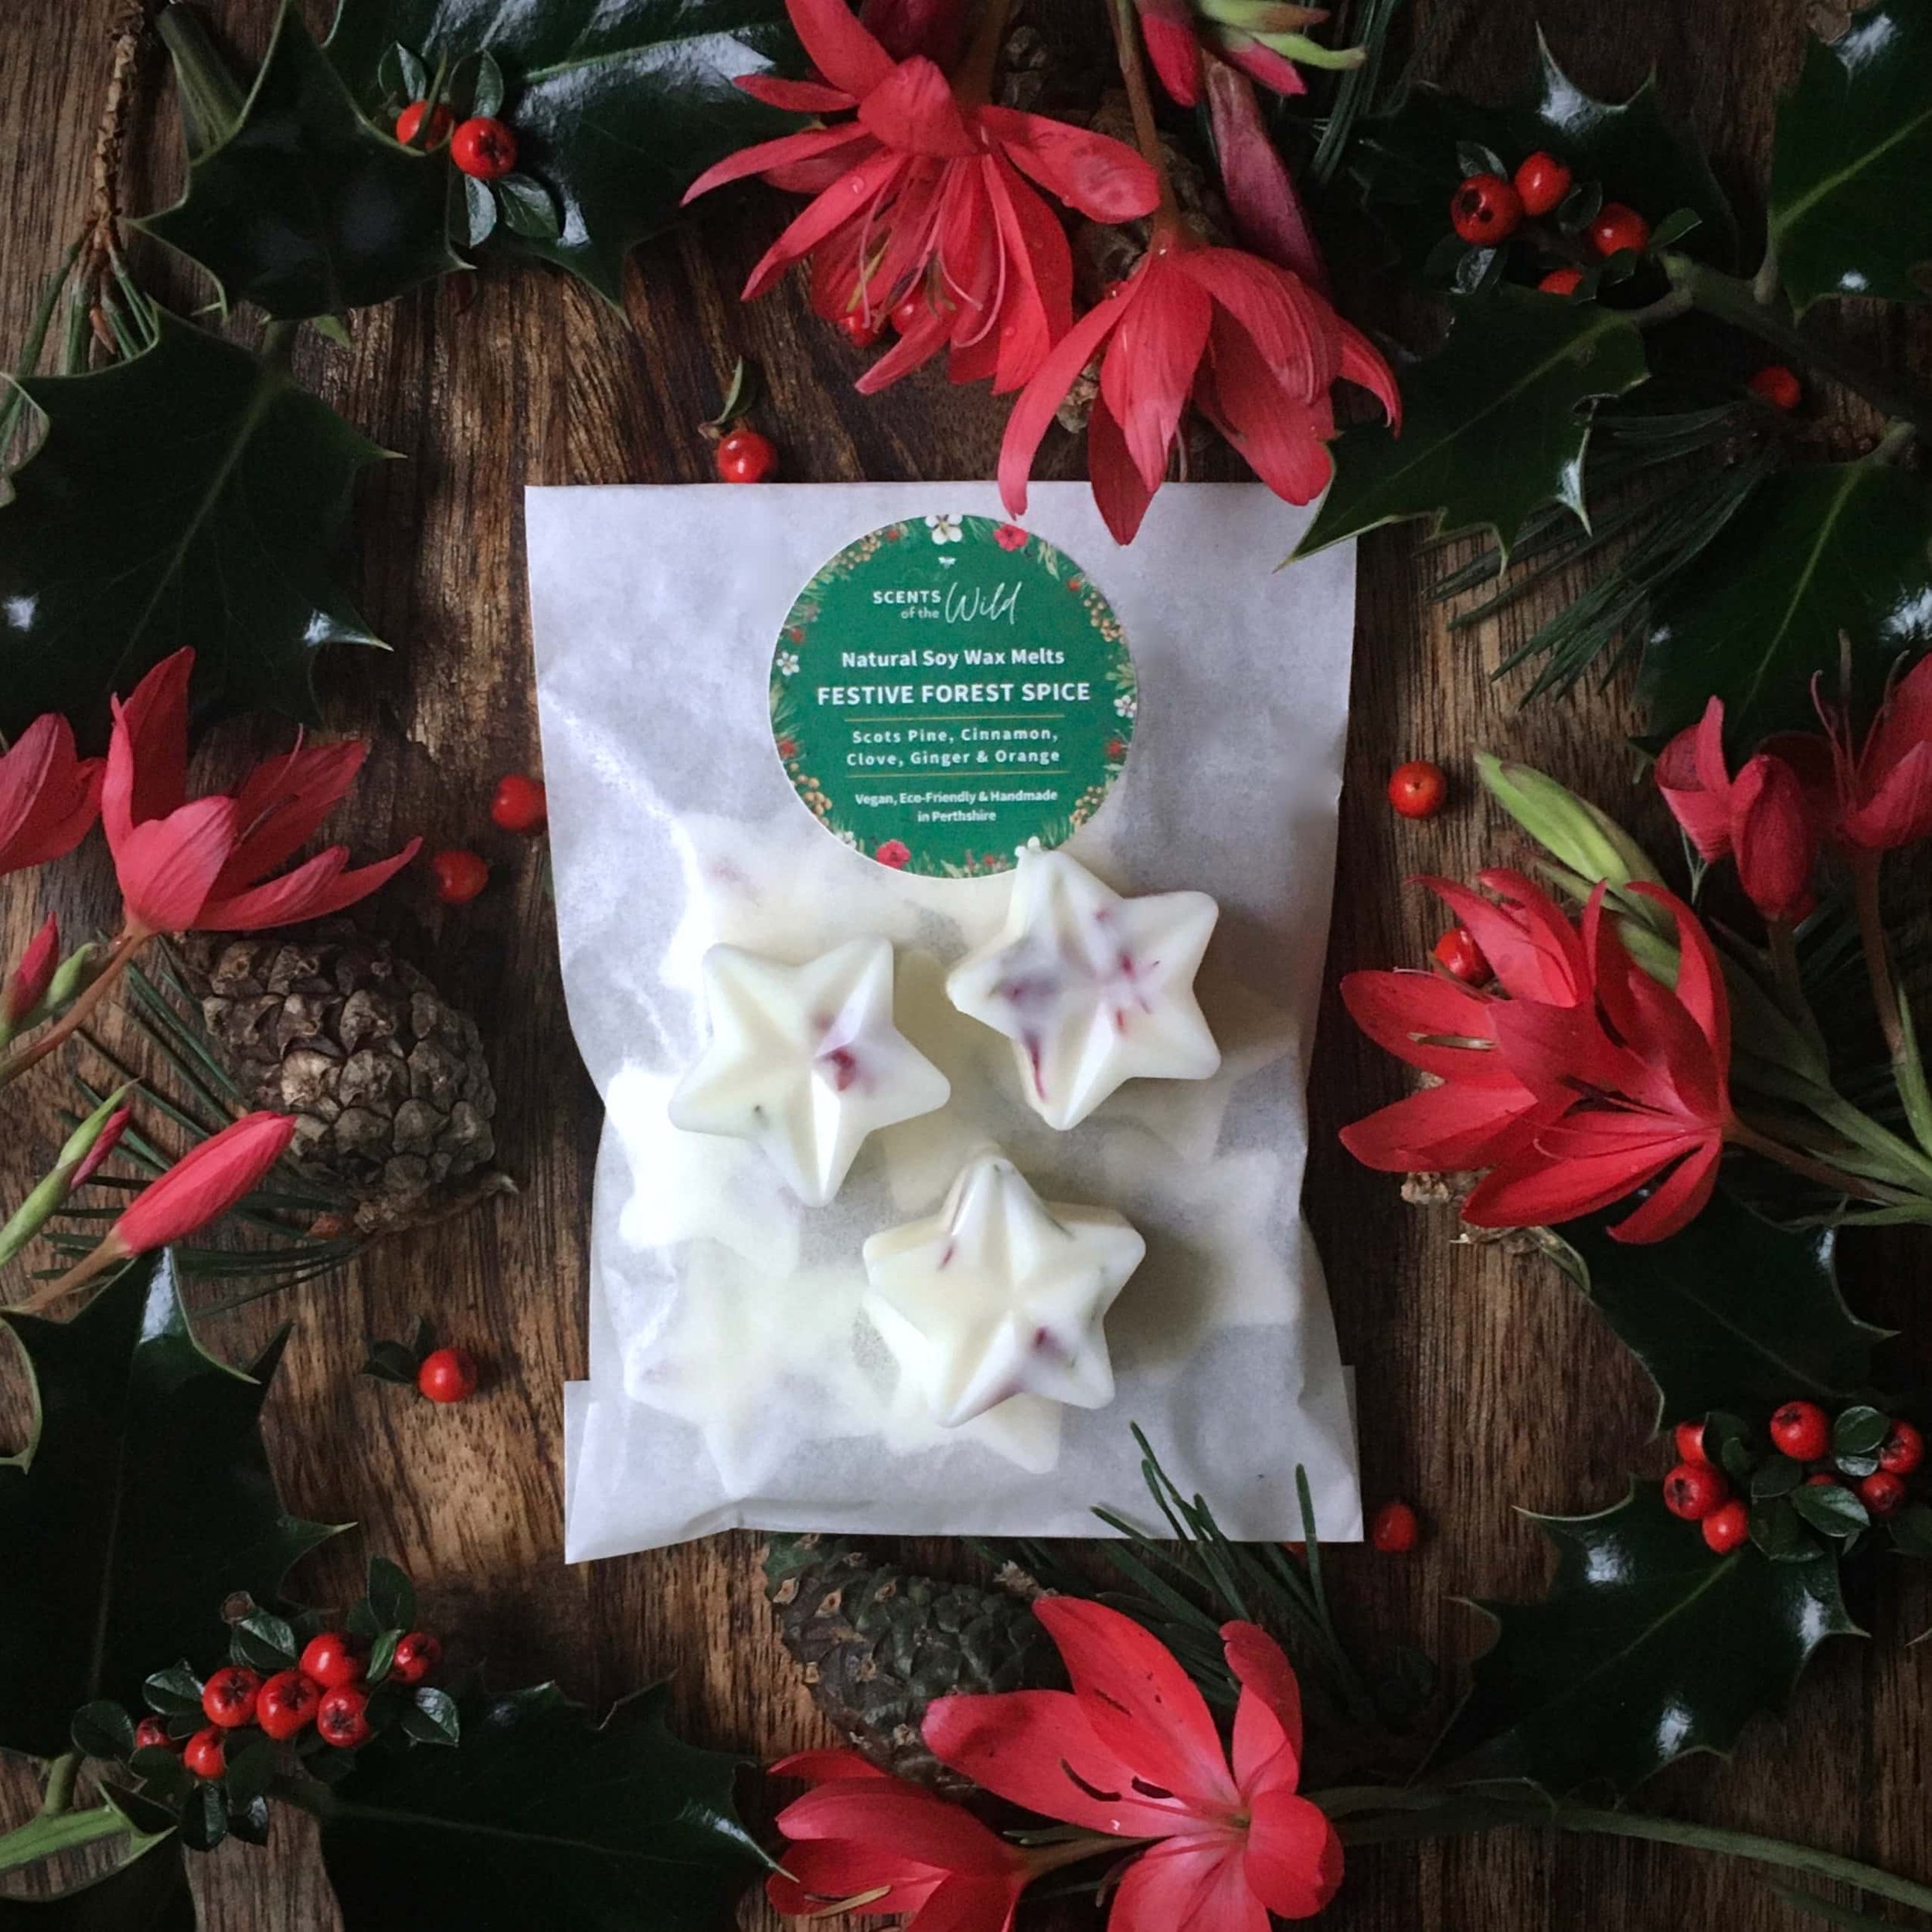 Festive Forest Spice Christmas wax melts packet.jpg